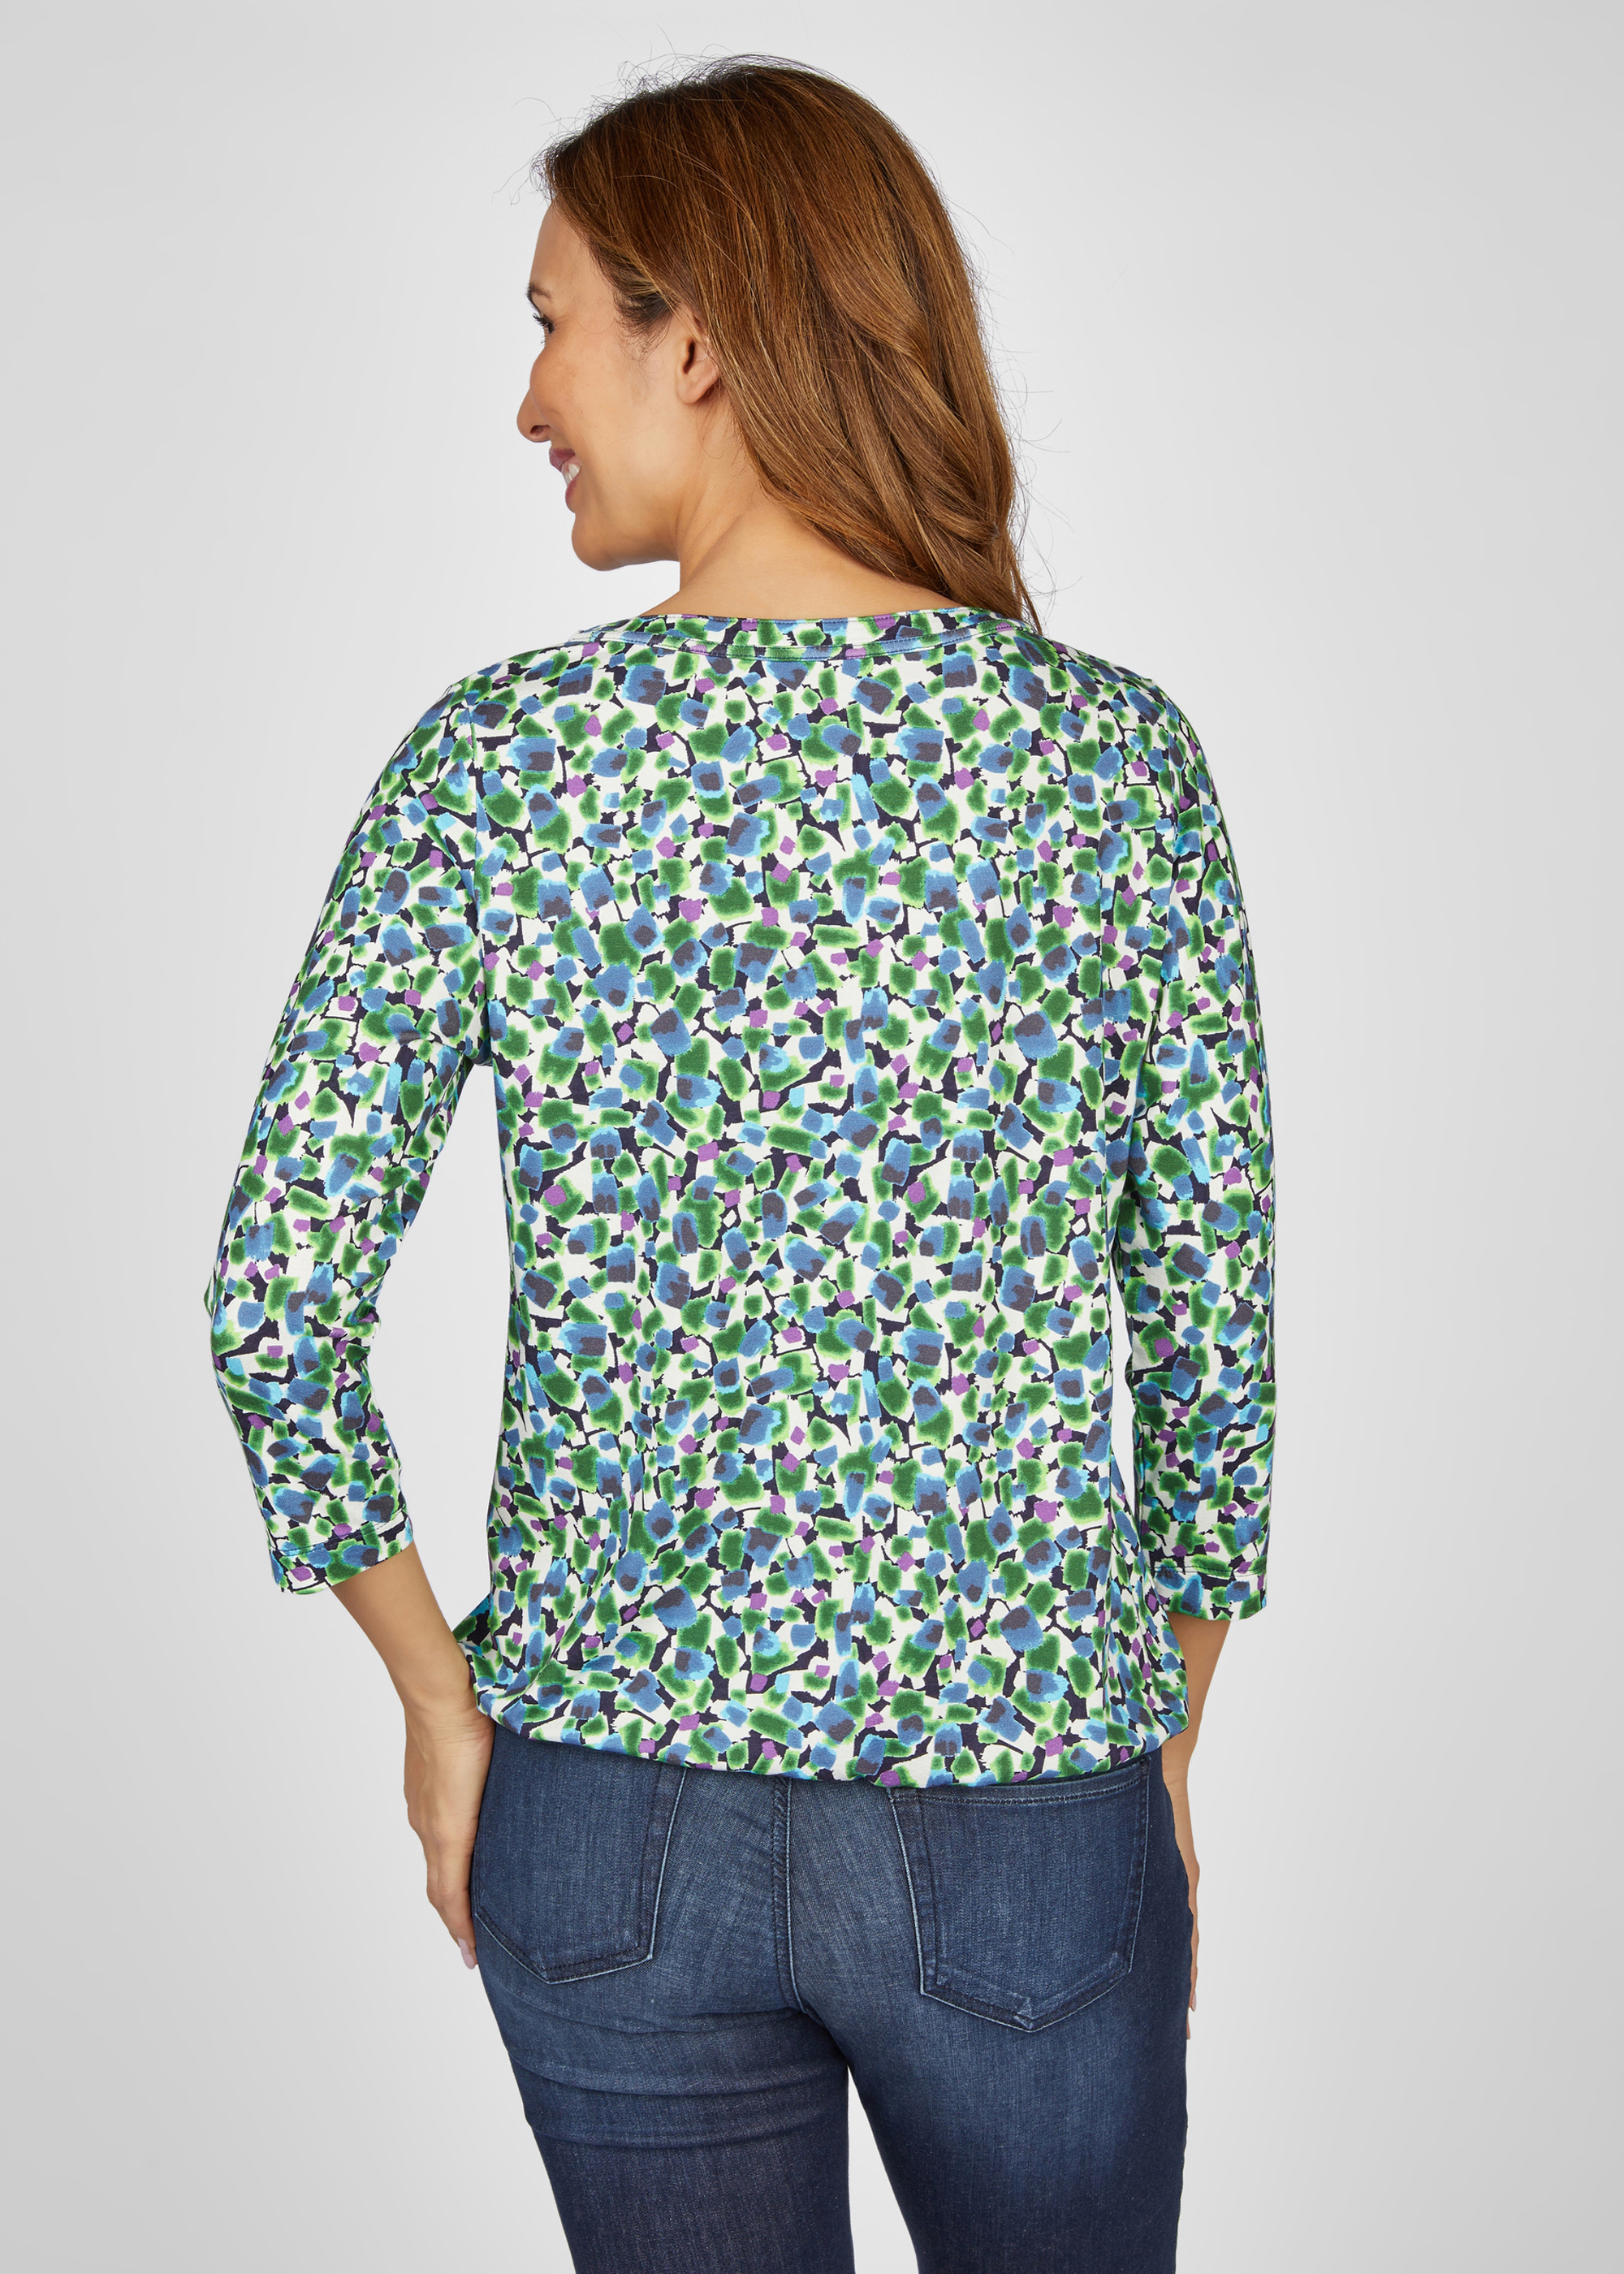 Shirt mit Allover-Muster